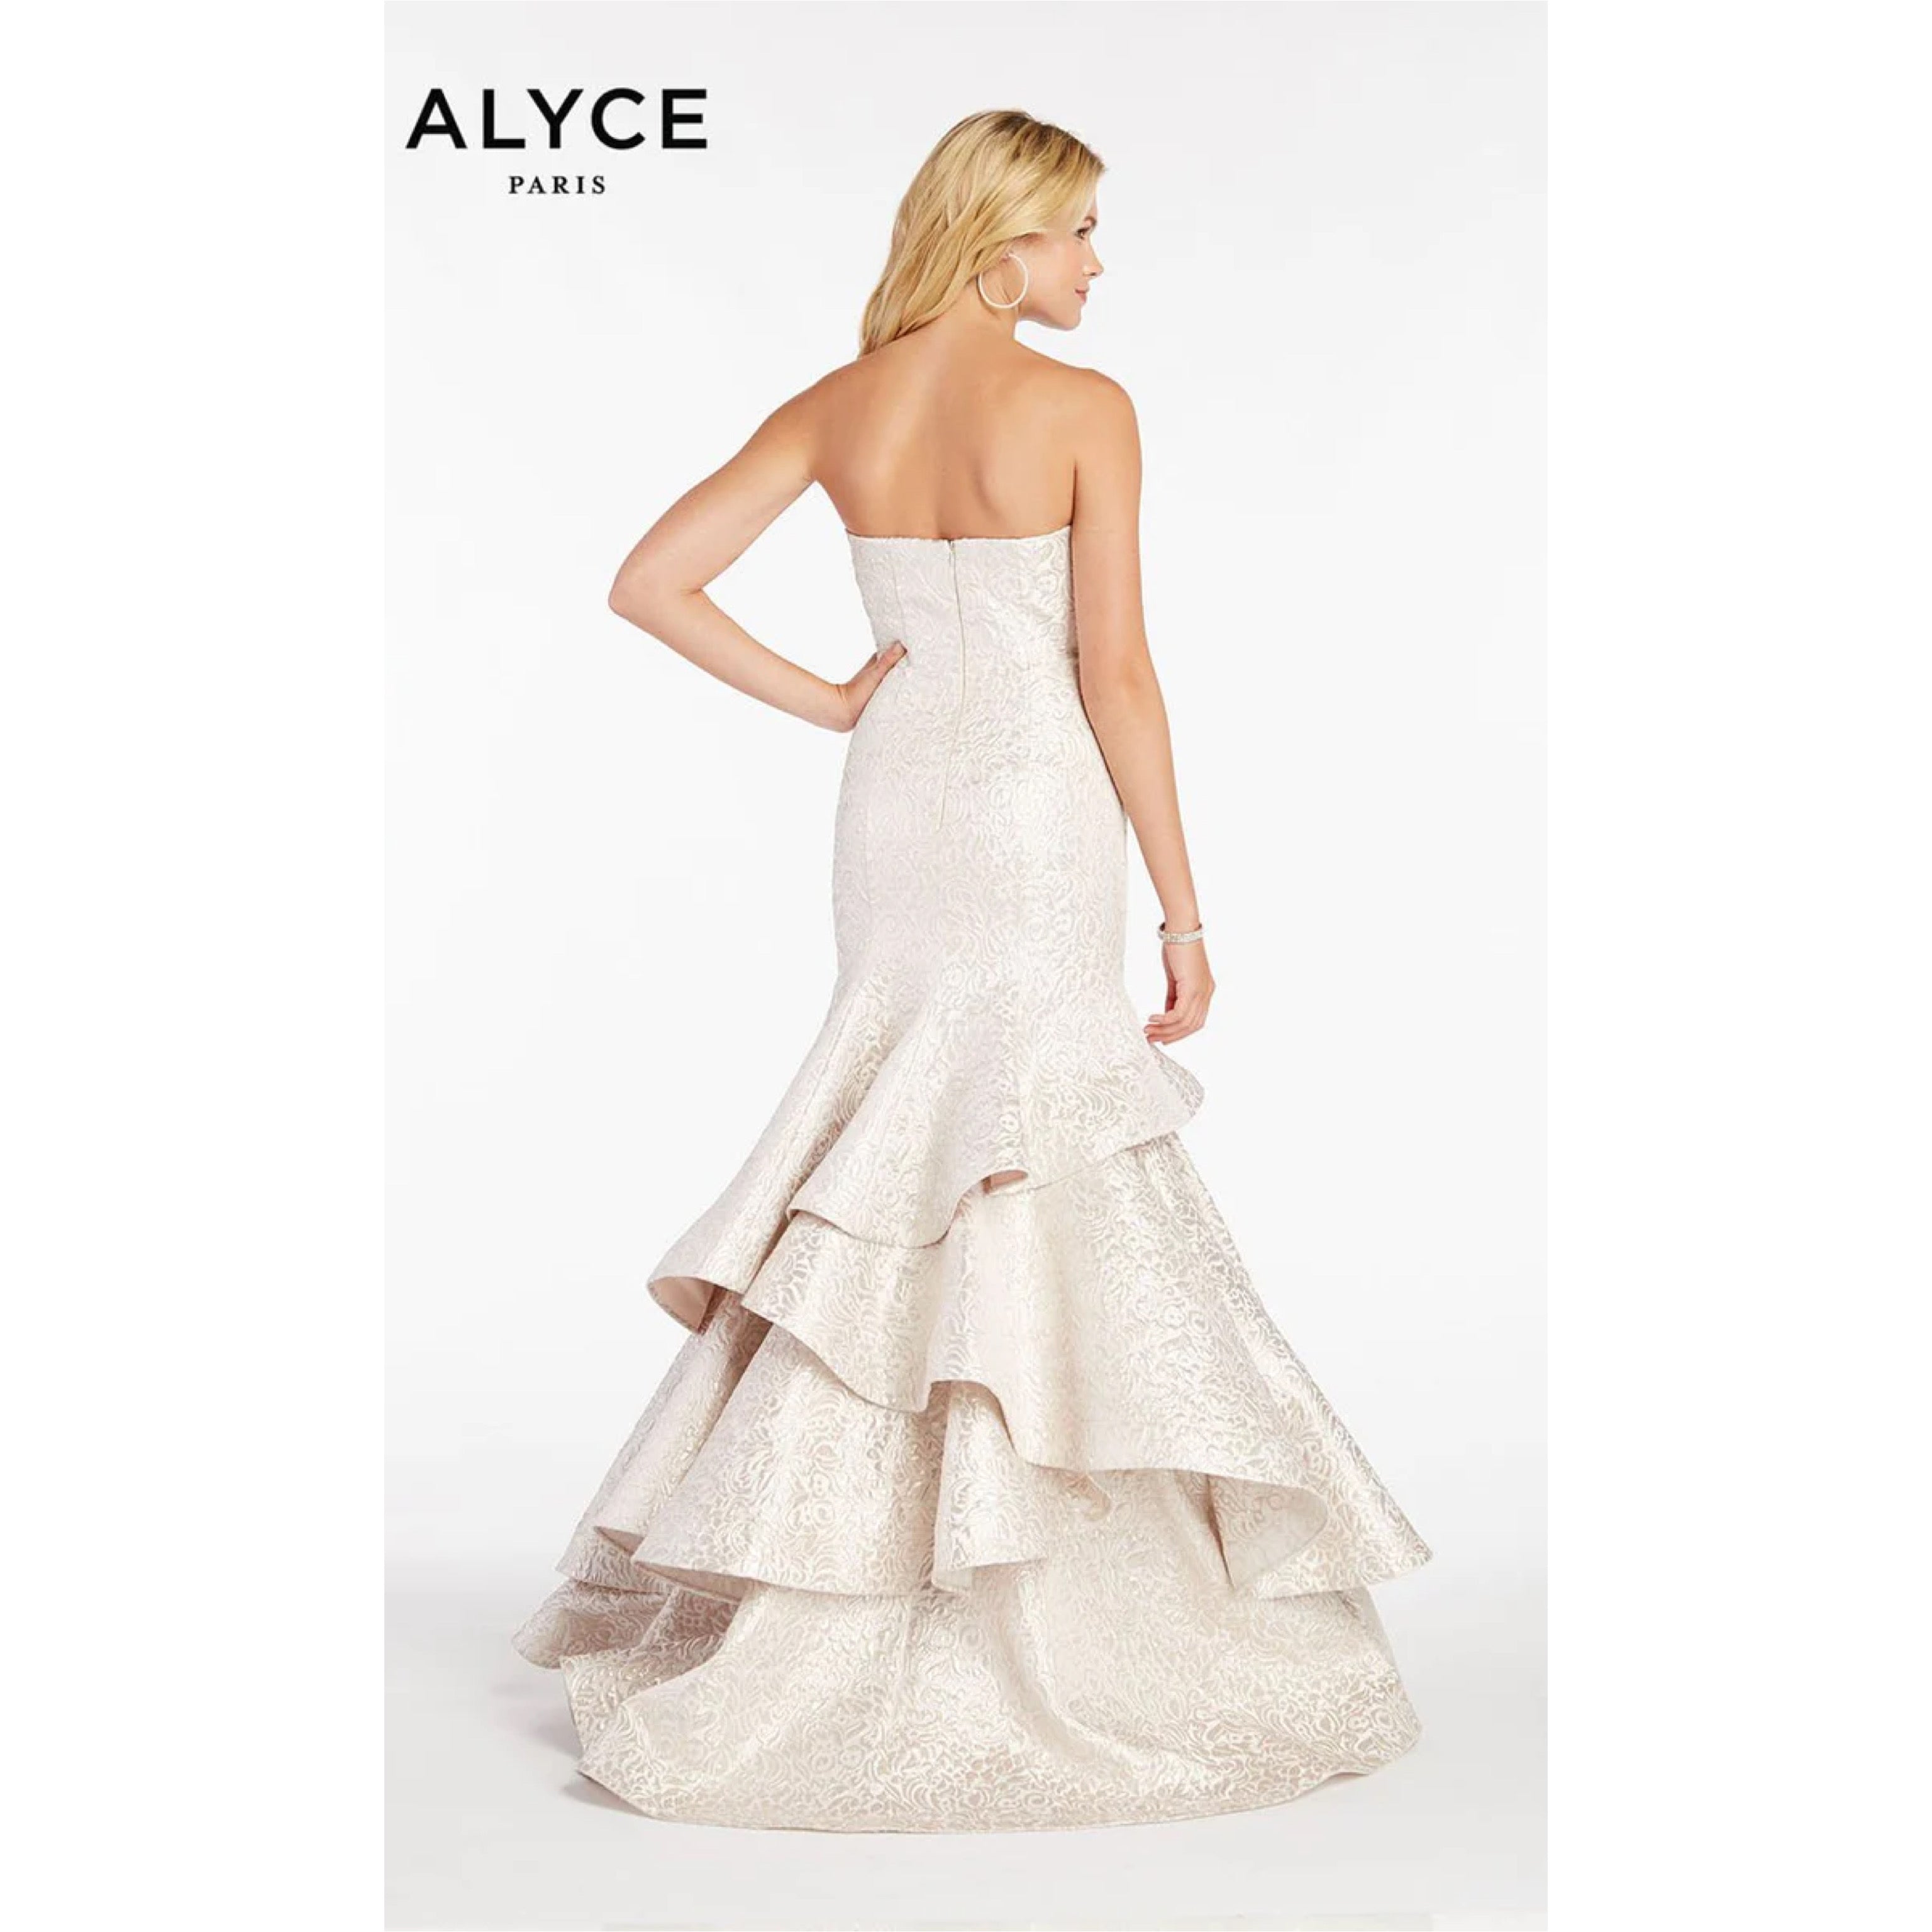 Alyce champagne dress, size 0, NEW WITH TAGS!